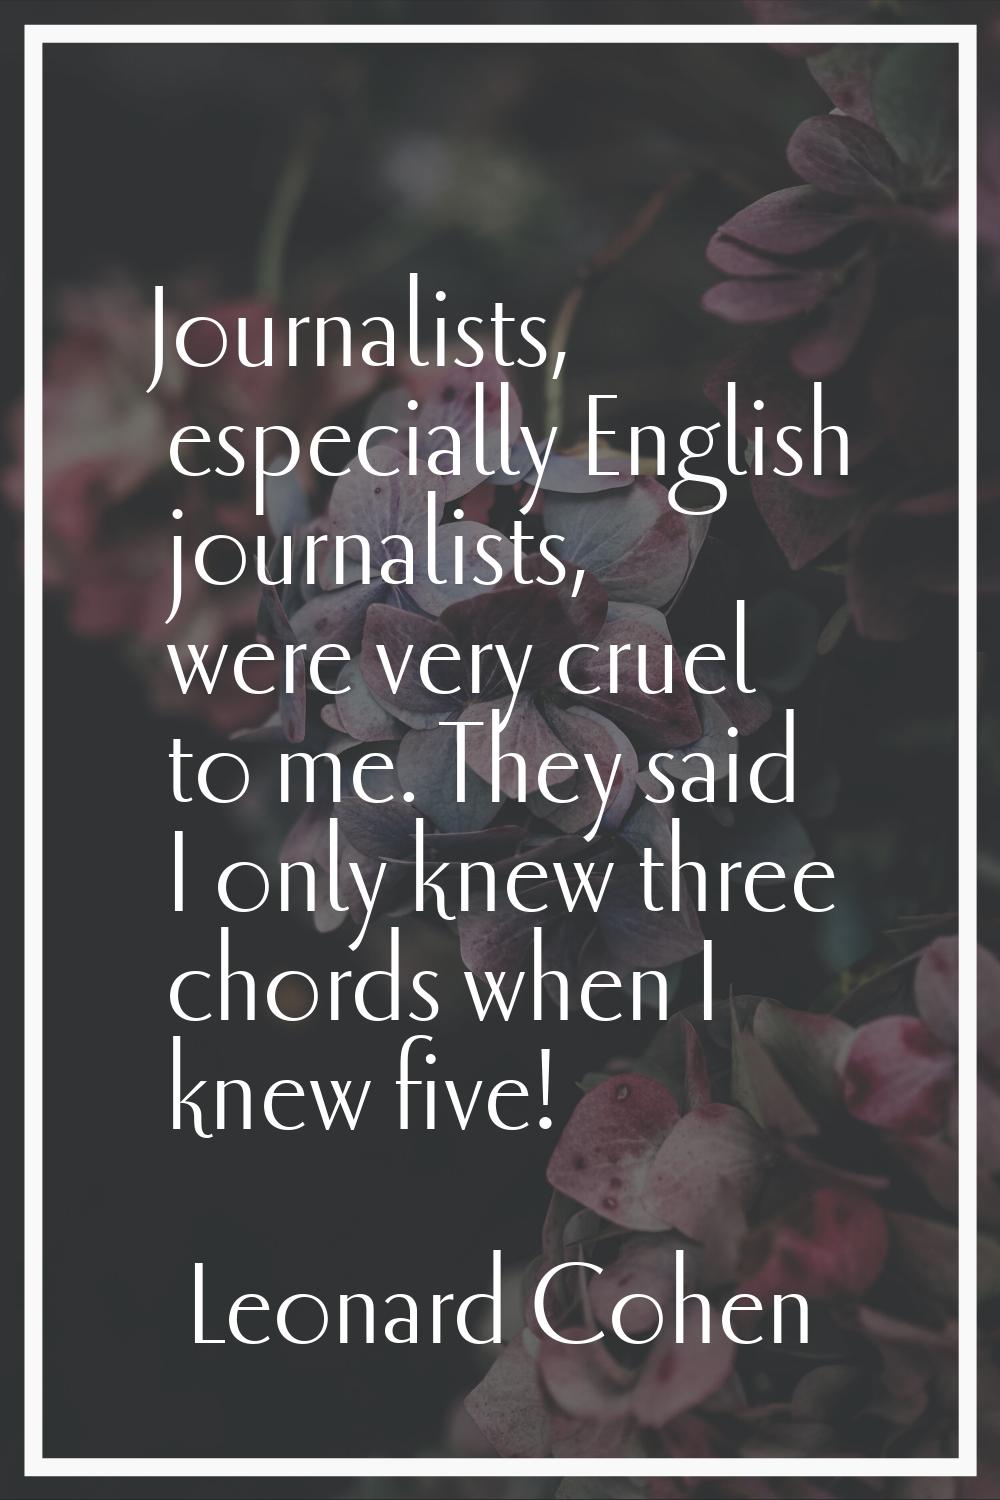 Journalists, especially English journalists, were very cruel to me. They said I only knew three cho